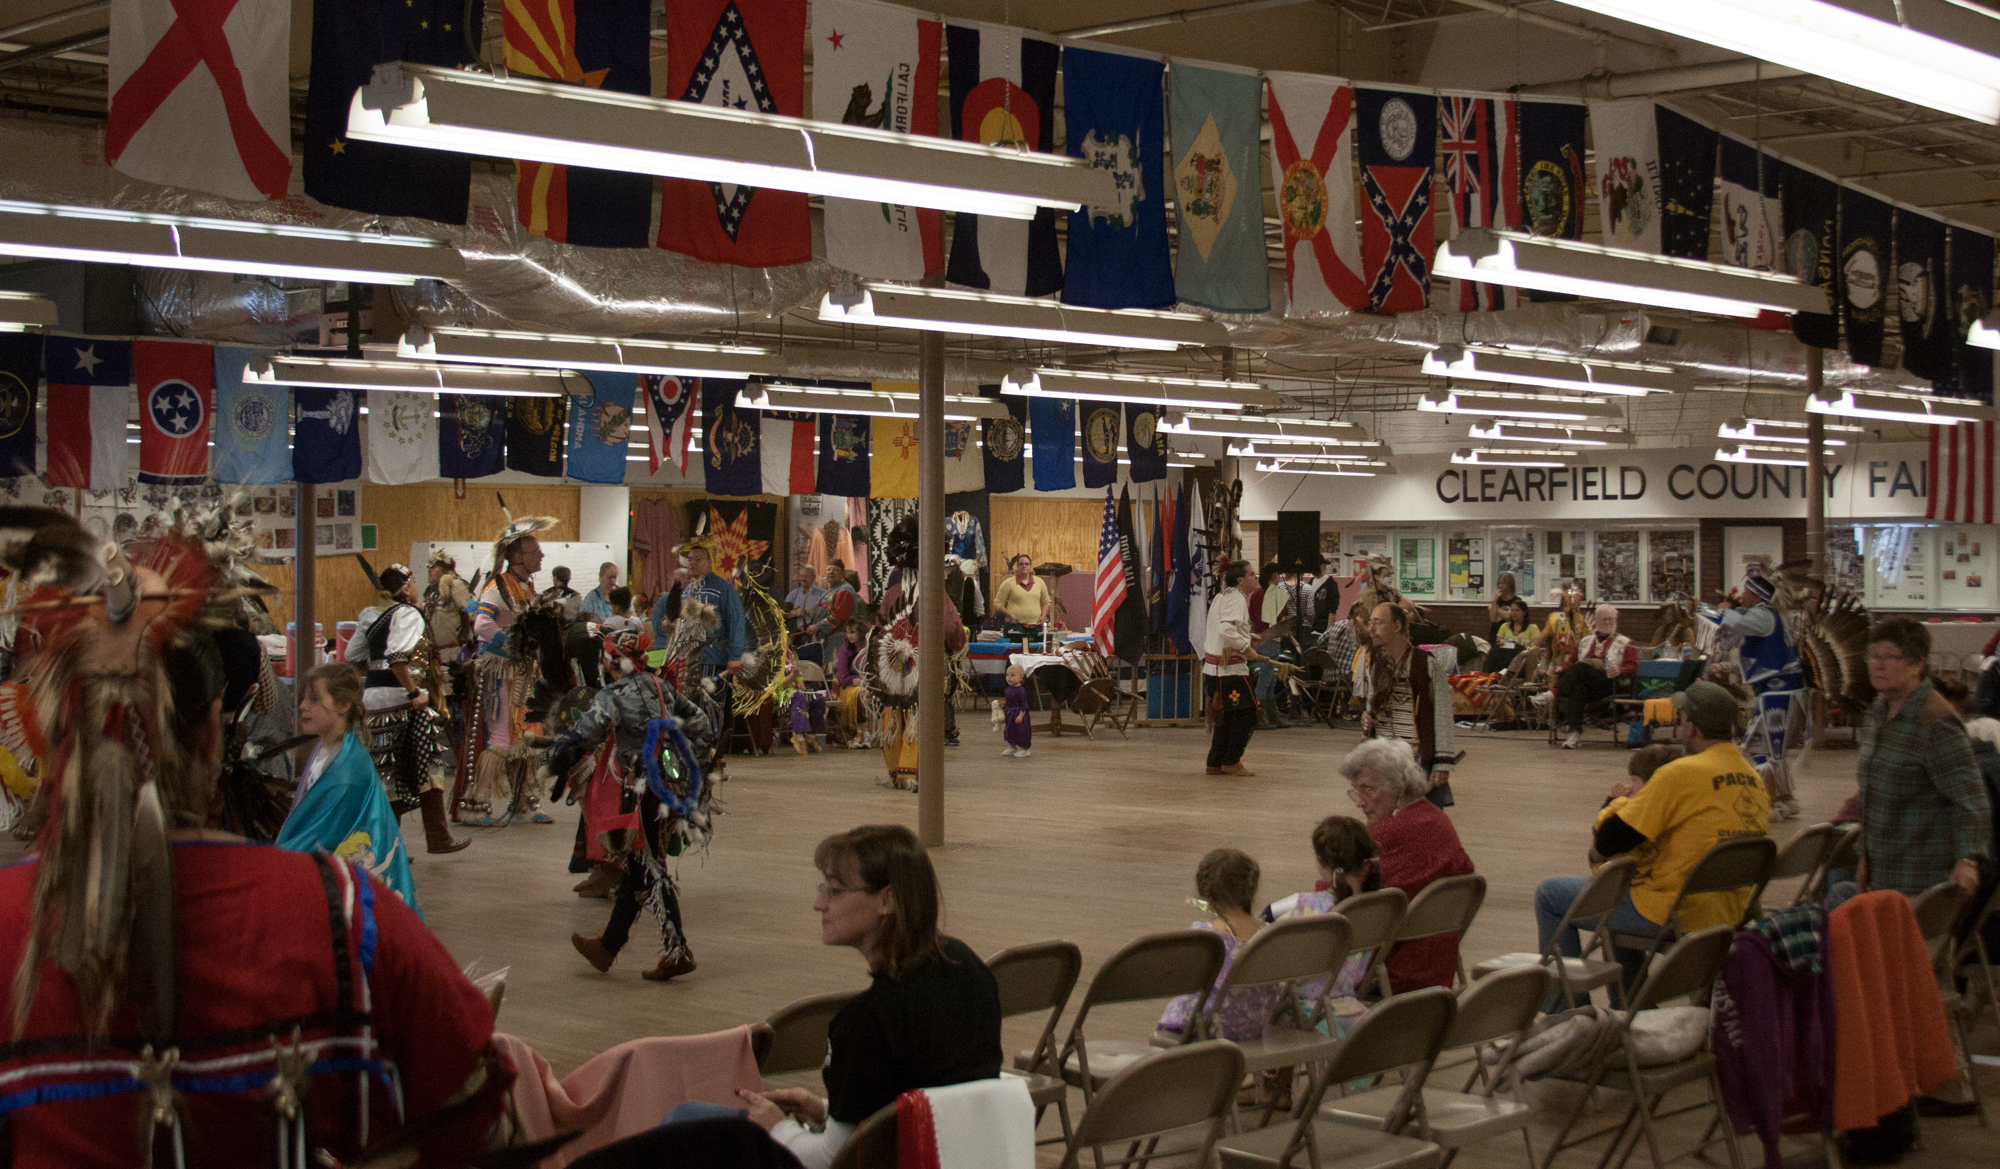 Pictured is the dance circle as part for the Clearfield Veterans Day Powwow at the Expo 2 Building at the Clearfield Driving Park.